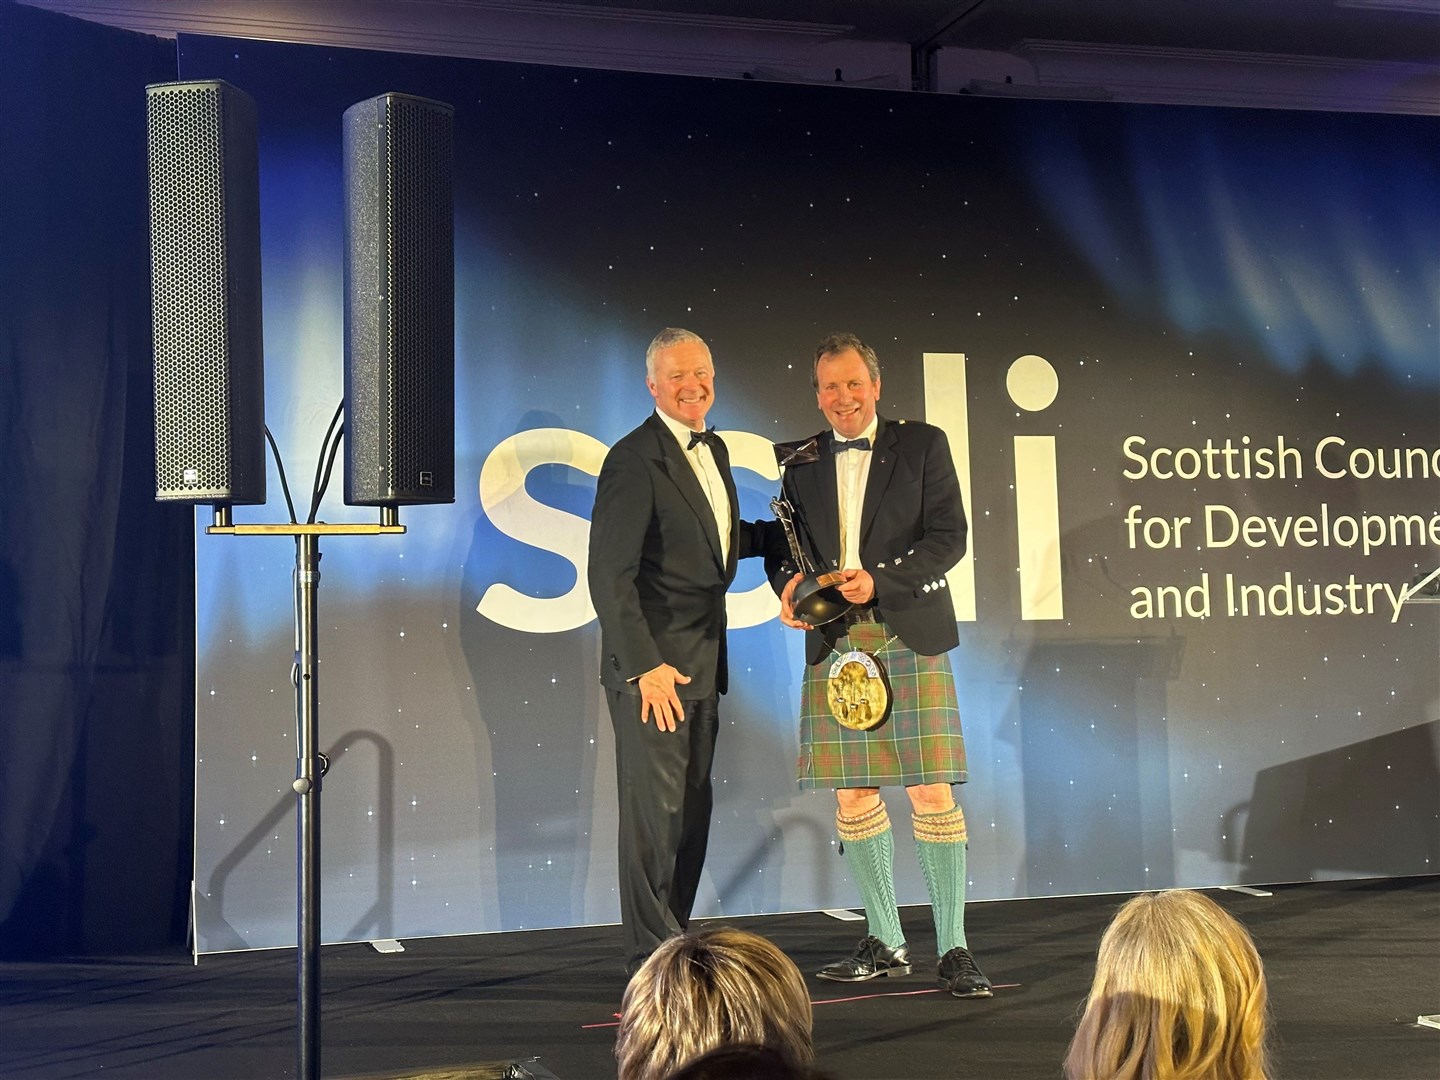 David Whiteford picks up the award from Rory Bremner.